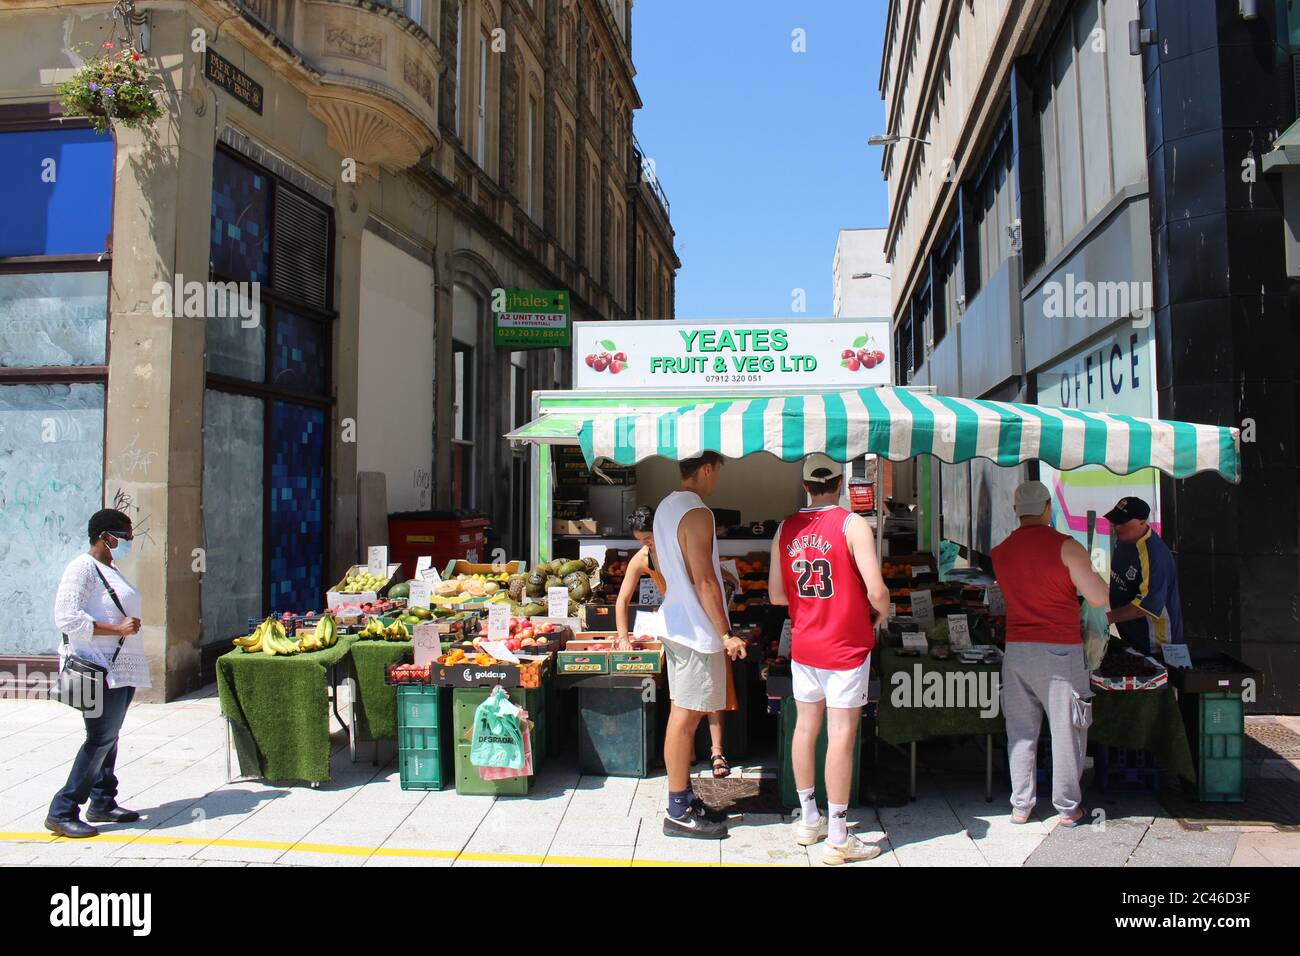 A photograph of a fruit and veg trader on Cardiff Queen Street.  Customers following social distancing measures queuing up.  Farmer's market. Stock Photo